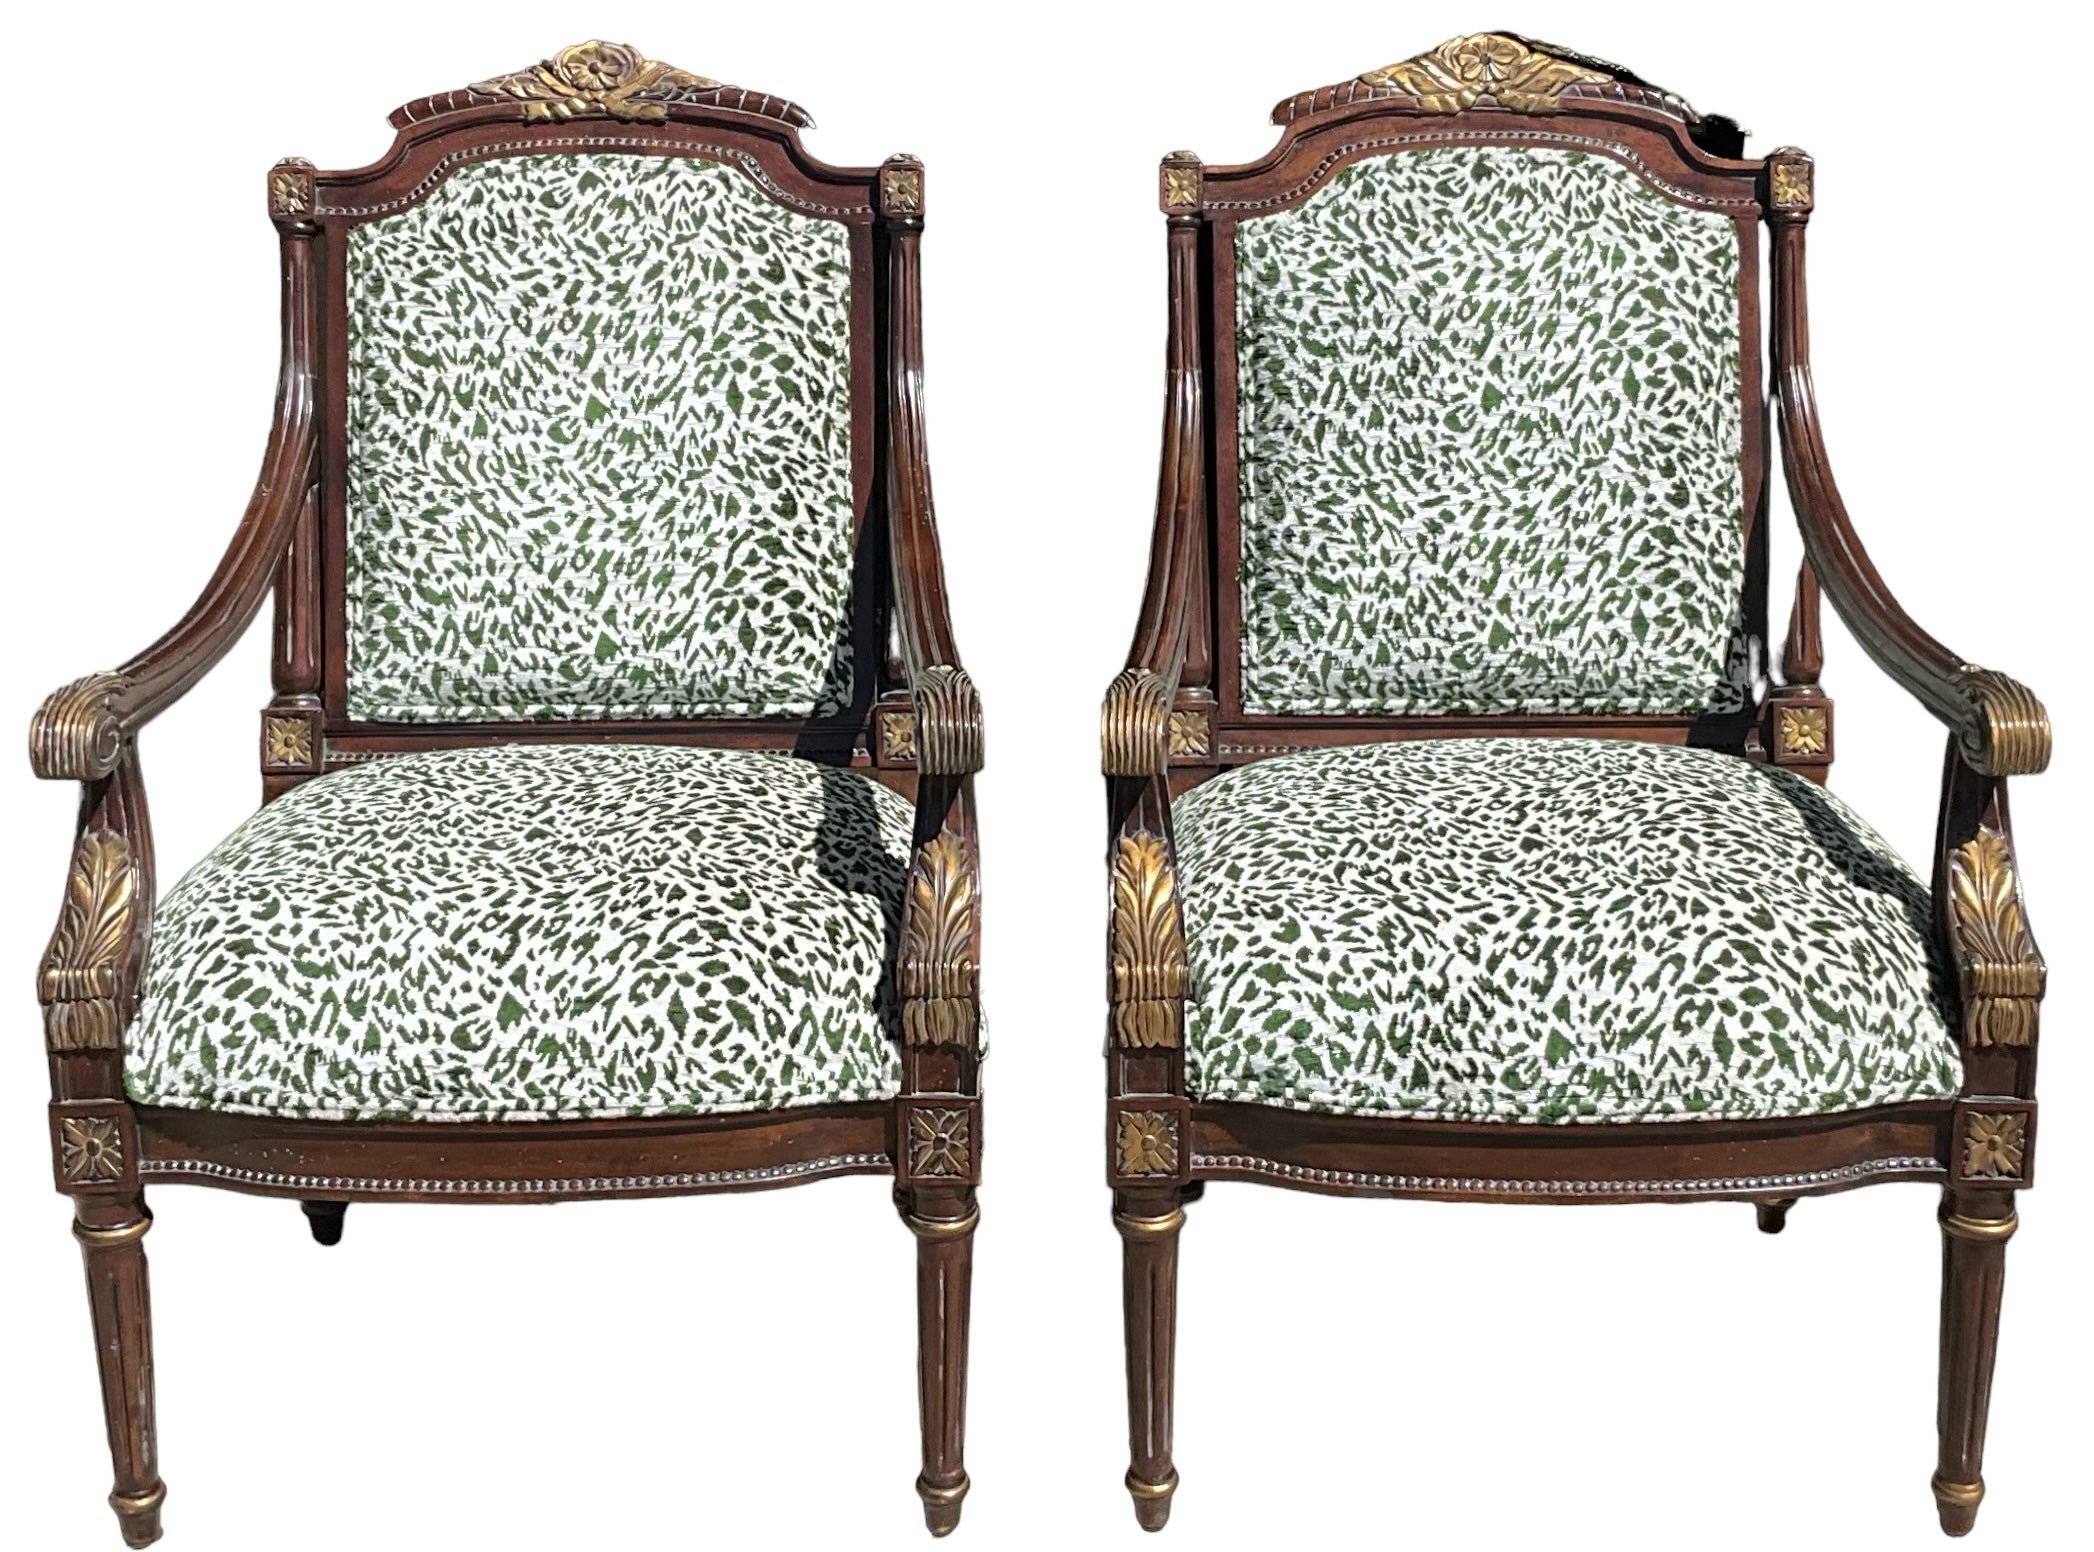 French Louis XVI Style Mahogany & Giltwood Bergere Chairs In Green Velvet - Pair For Sale